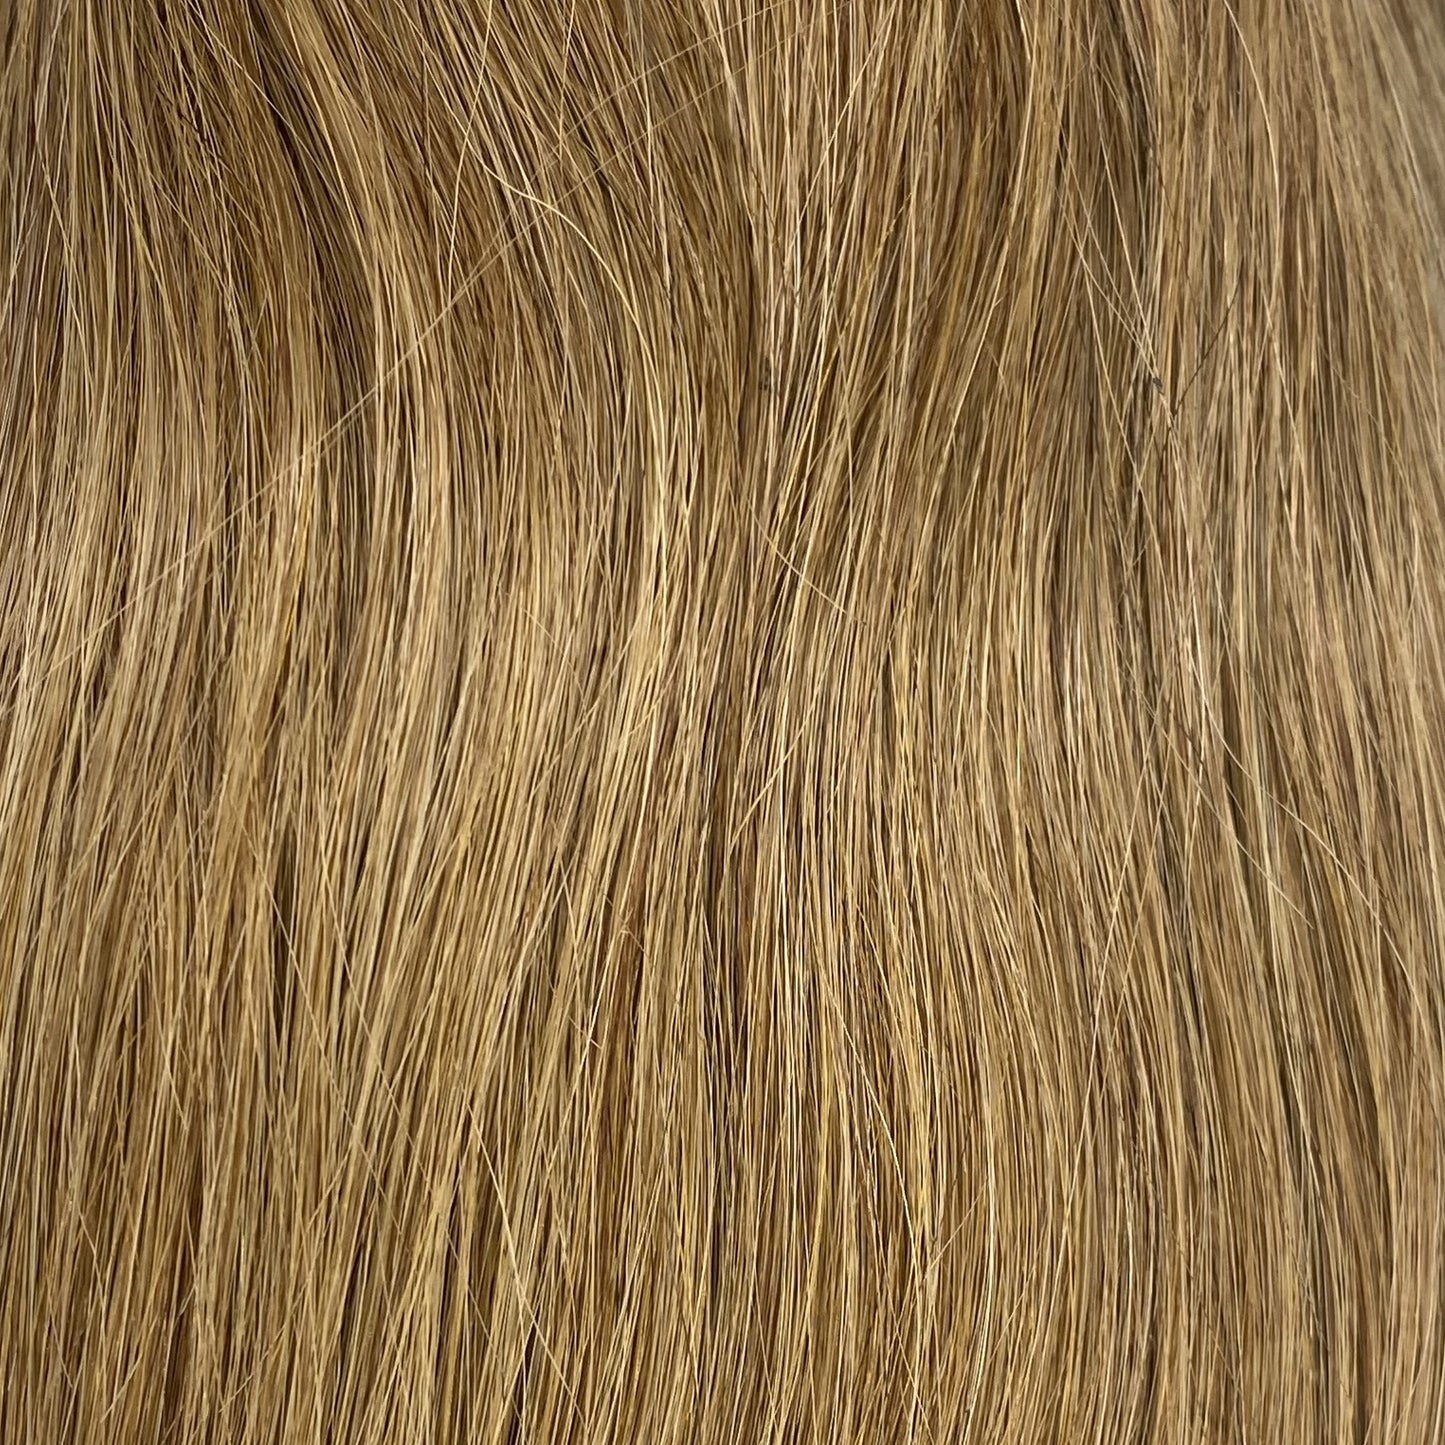 Velo #8 - 16 inches - Dark Blonde Velo DR Hair Products Co 